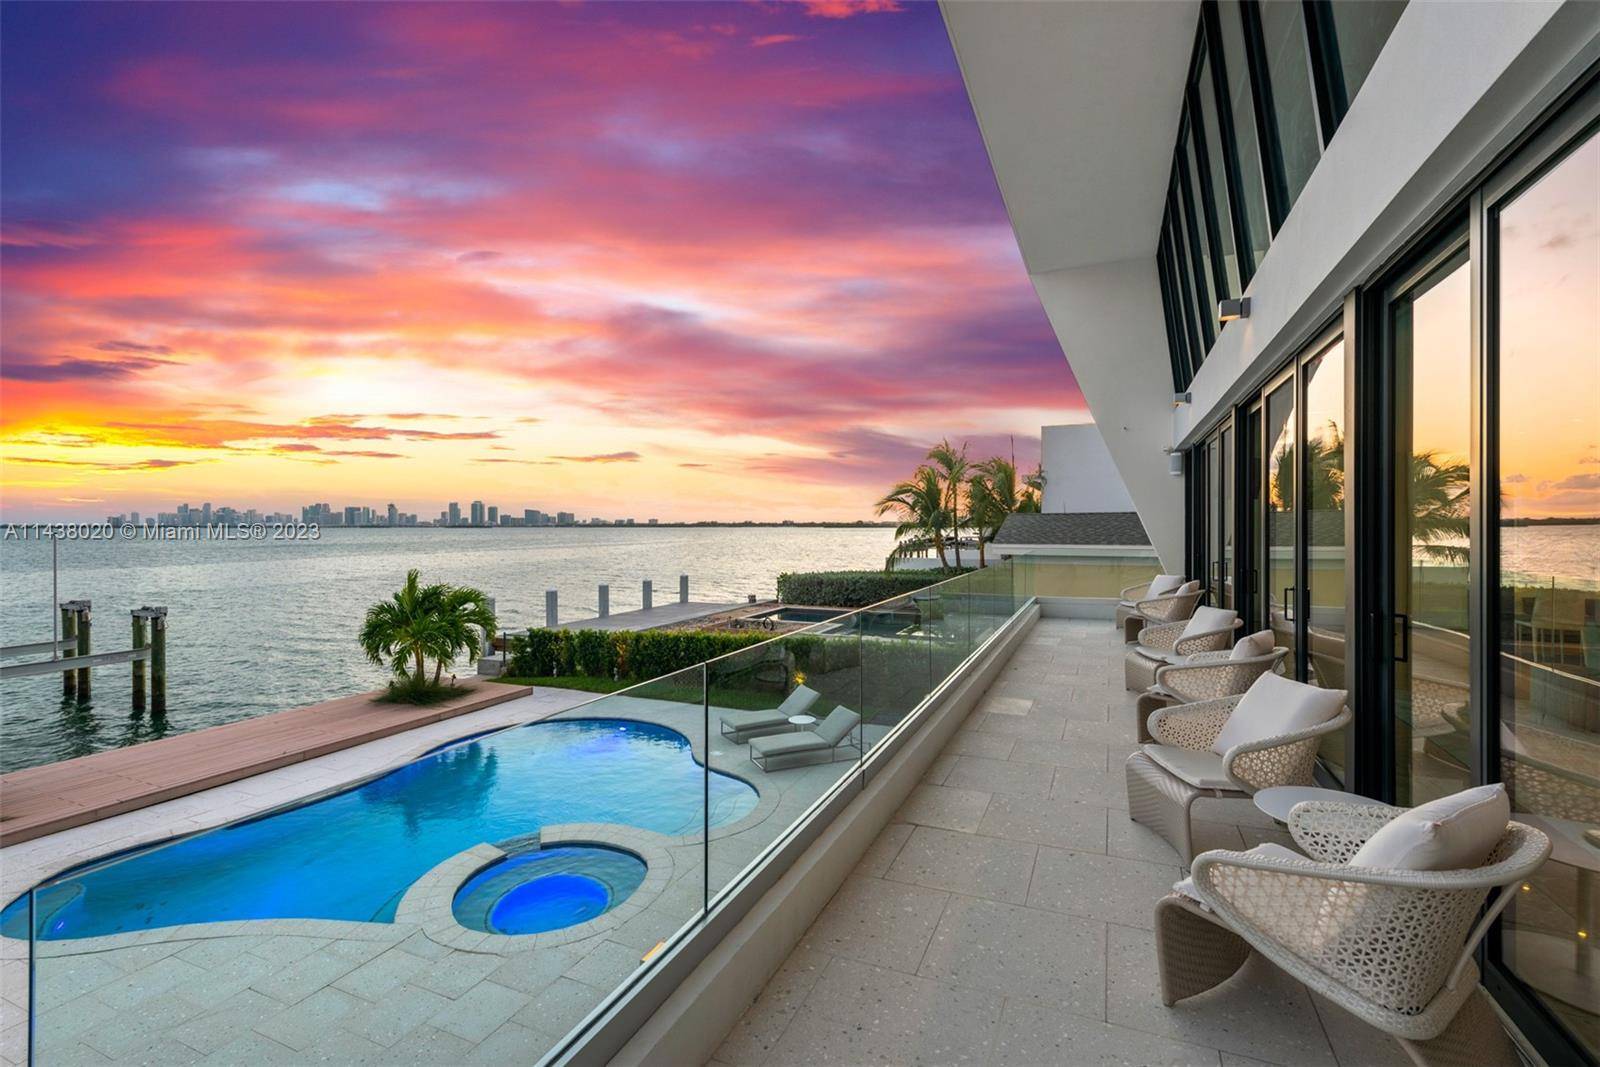 Located in a beautiful Biscayne Bay neighborhood, this designer decorated villa offers breathtaking sunrise and sunset views.